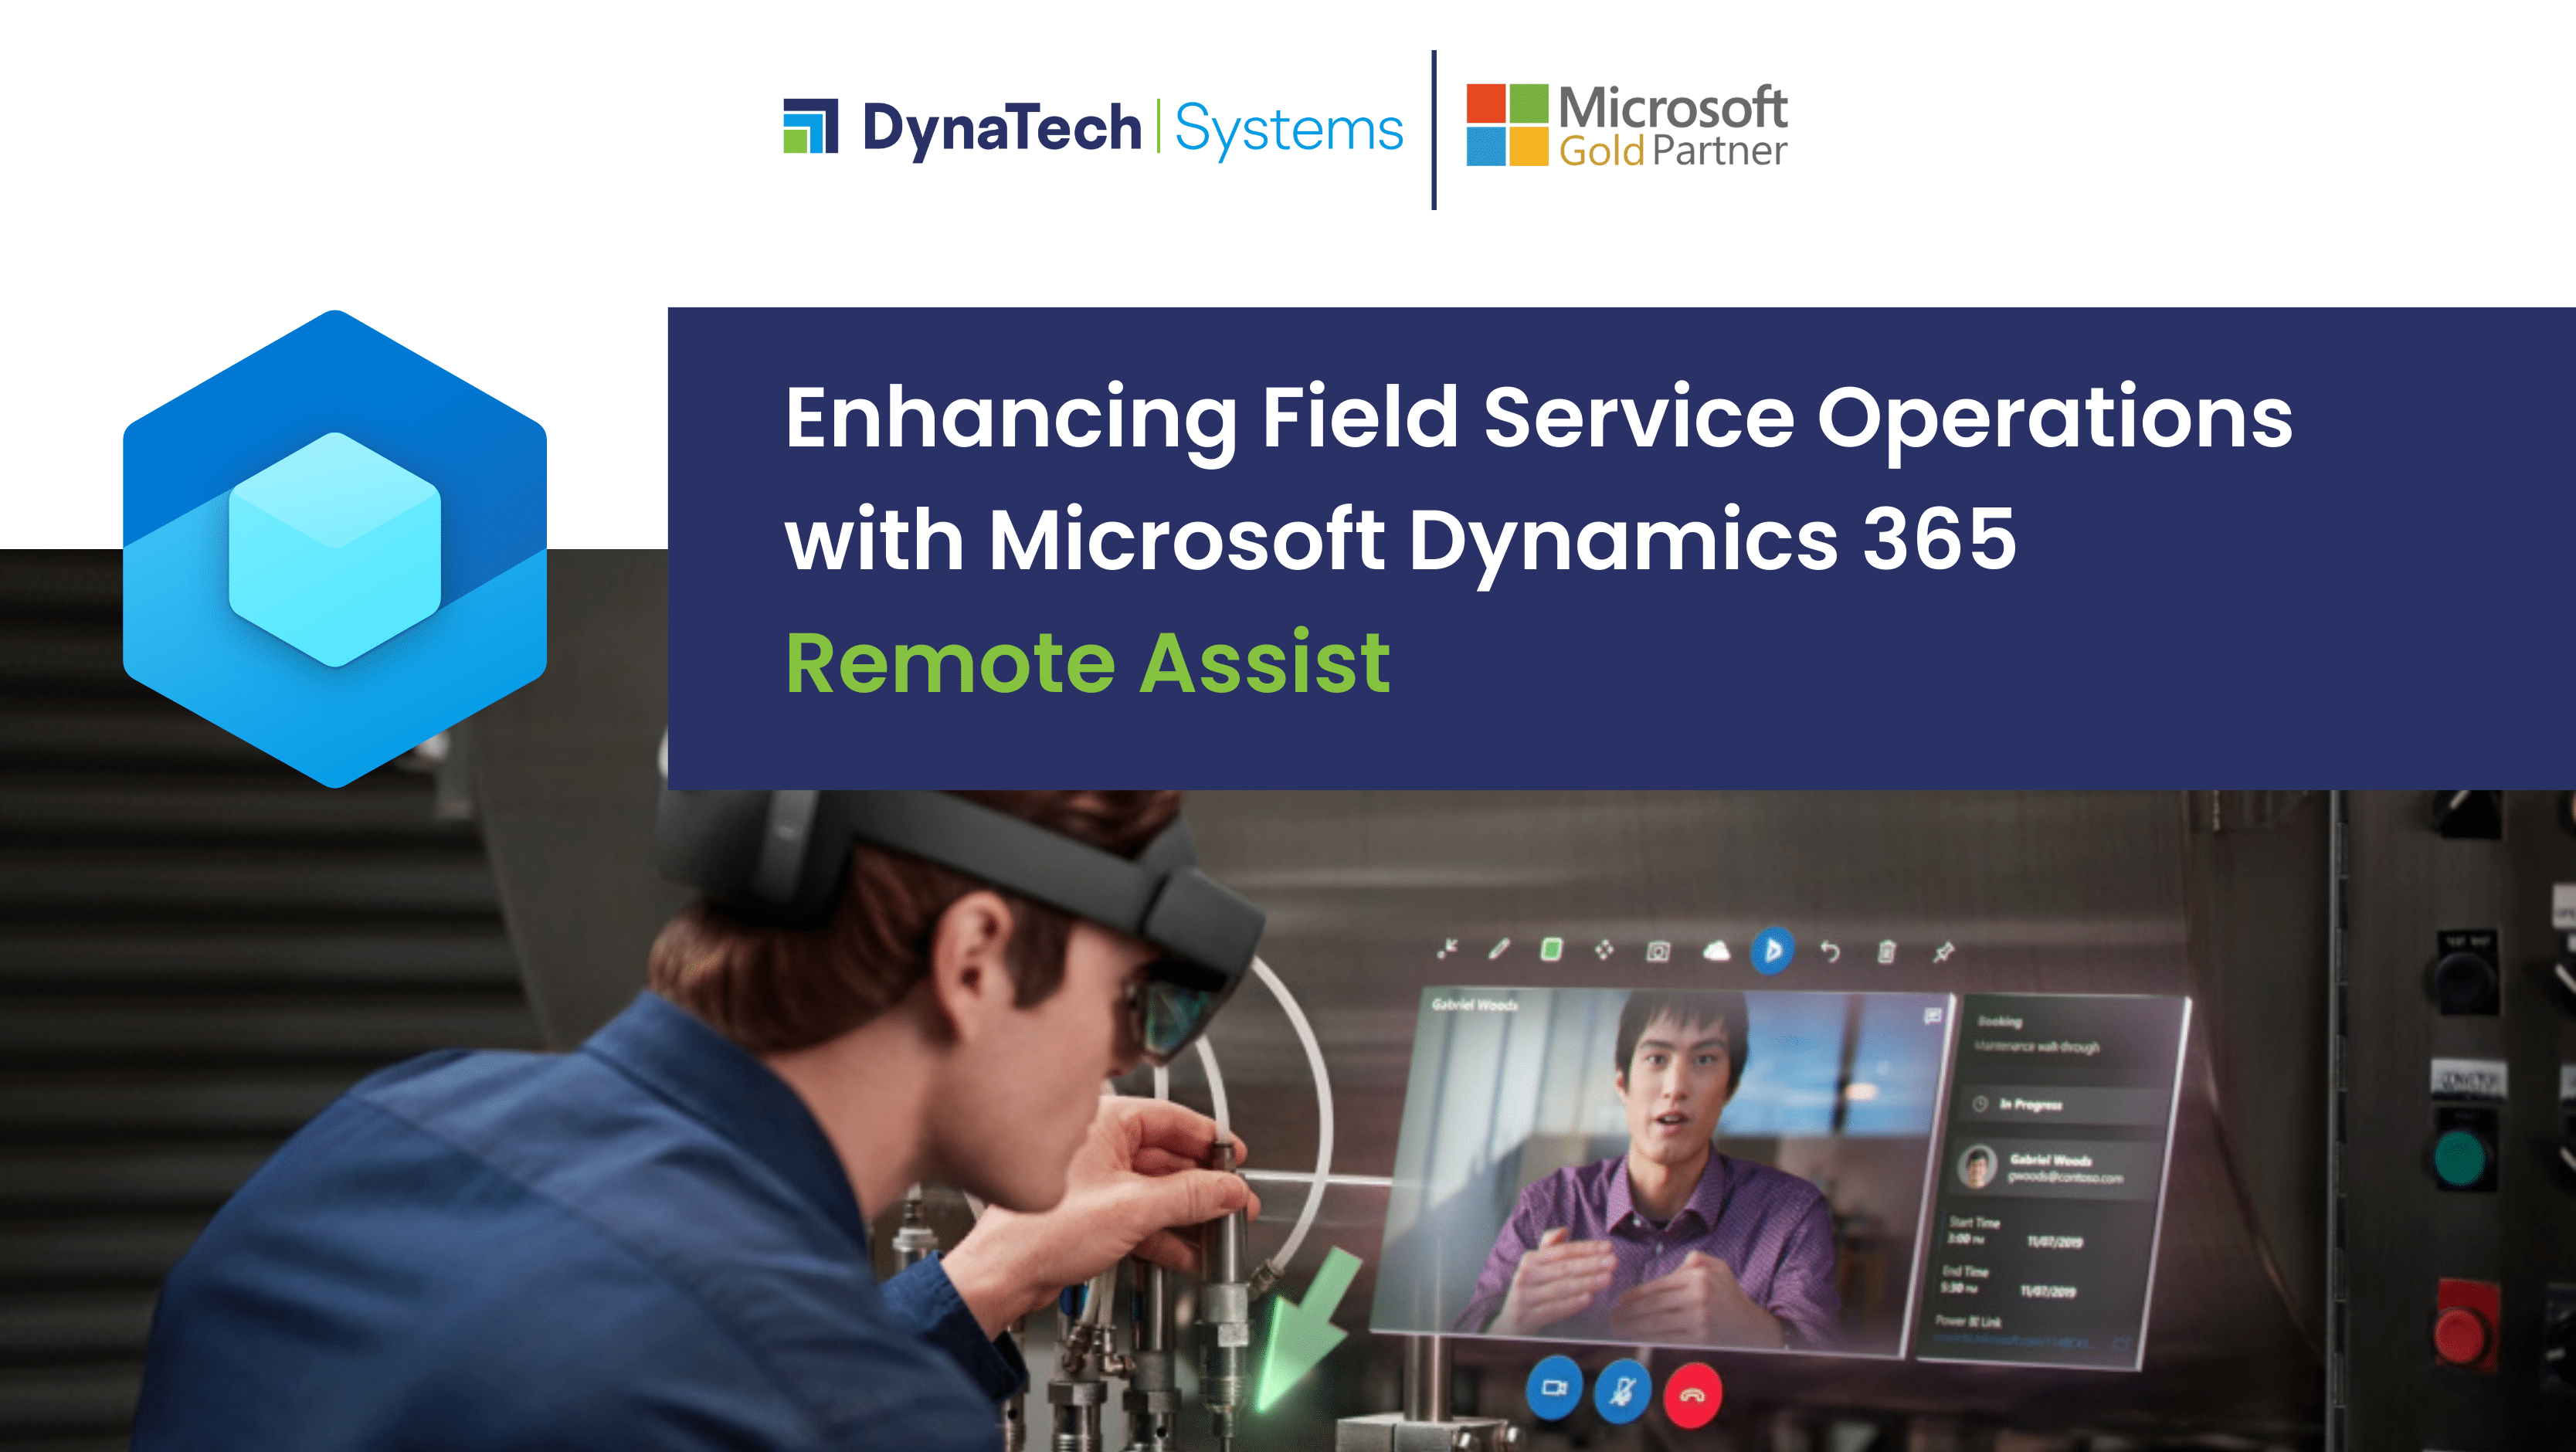 Enhancing Field Service Operations with Microsoft Dynamics 365 Remote Assist